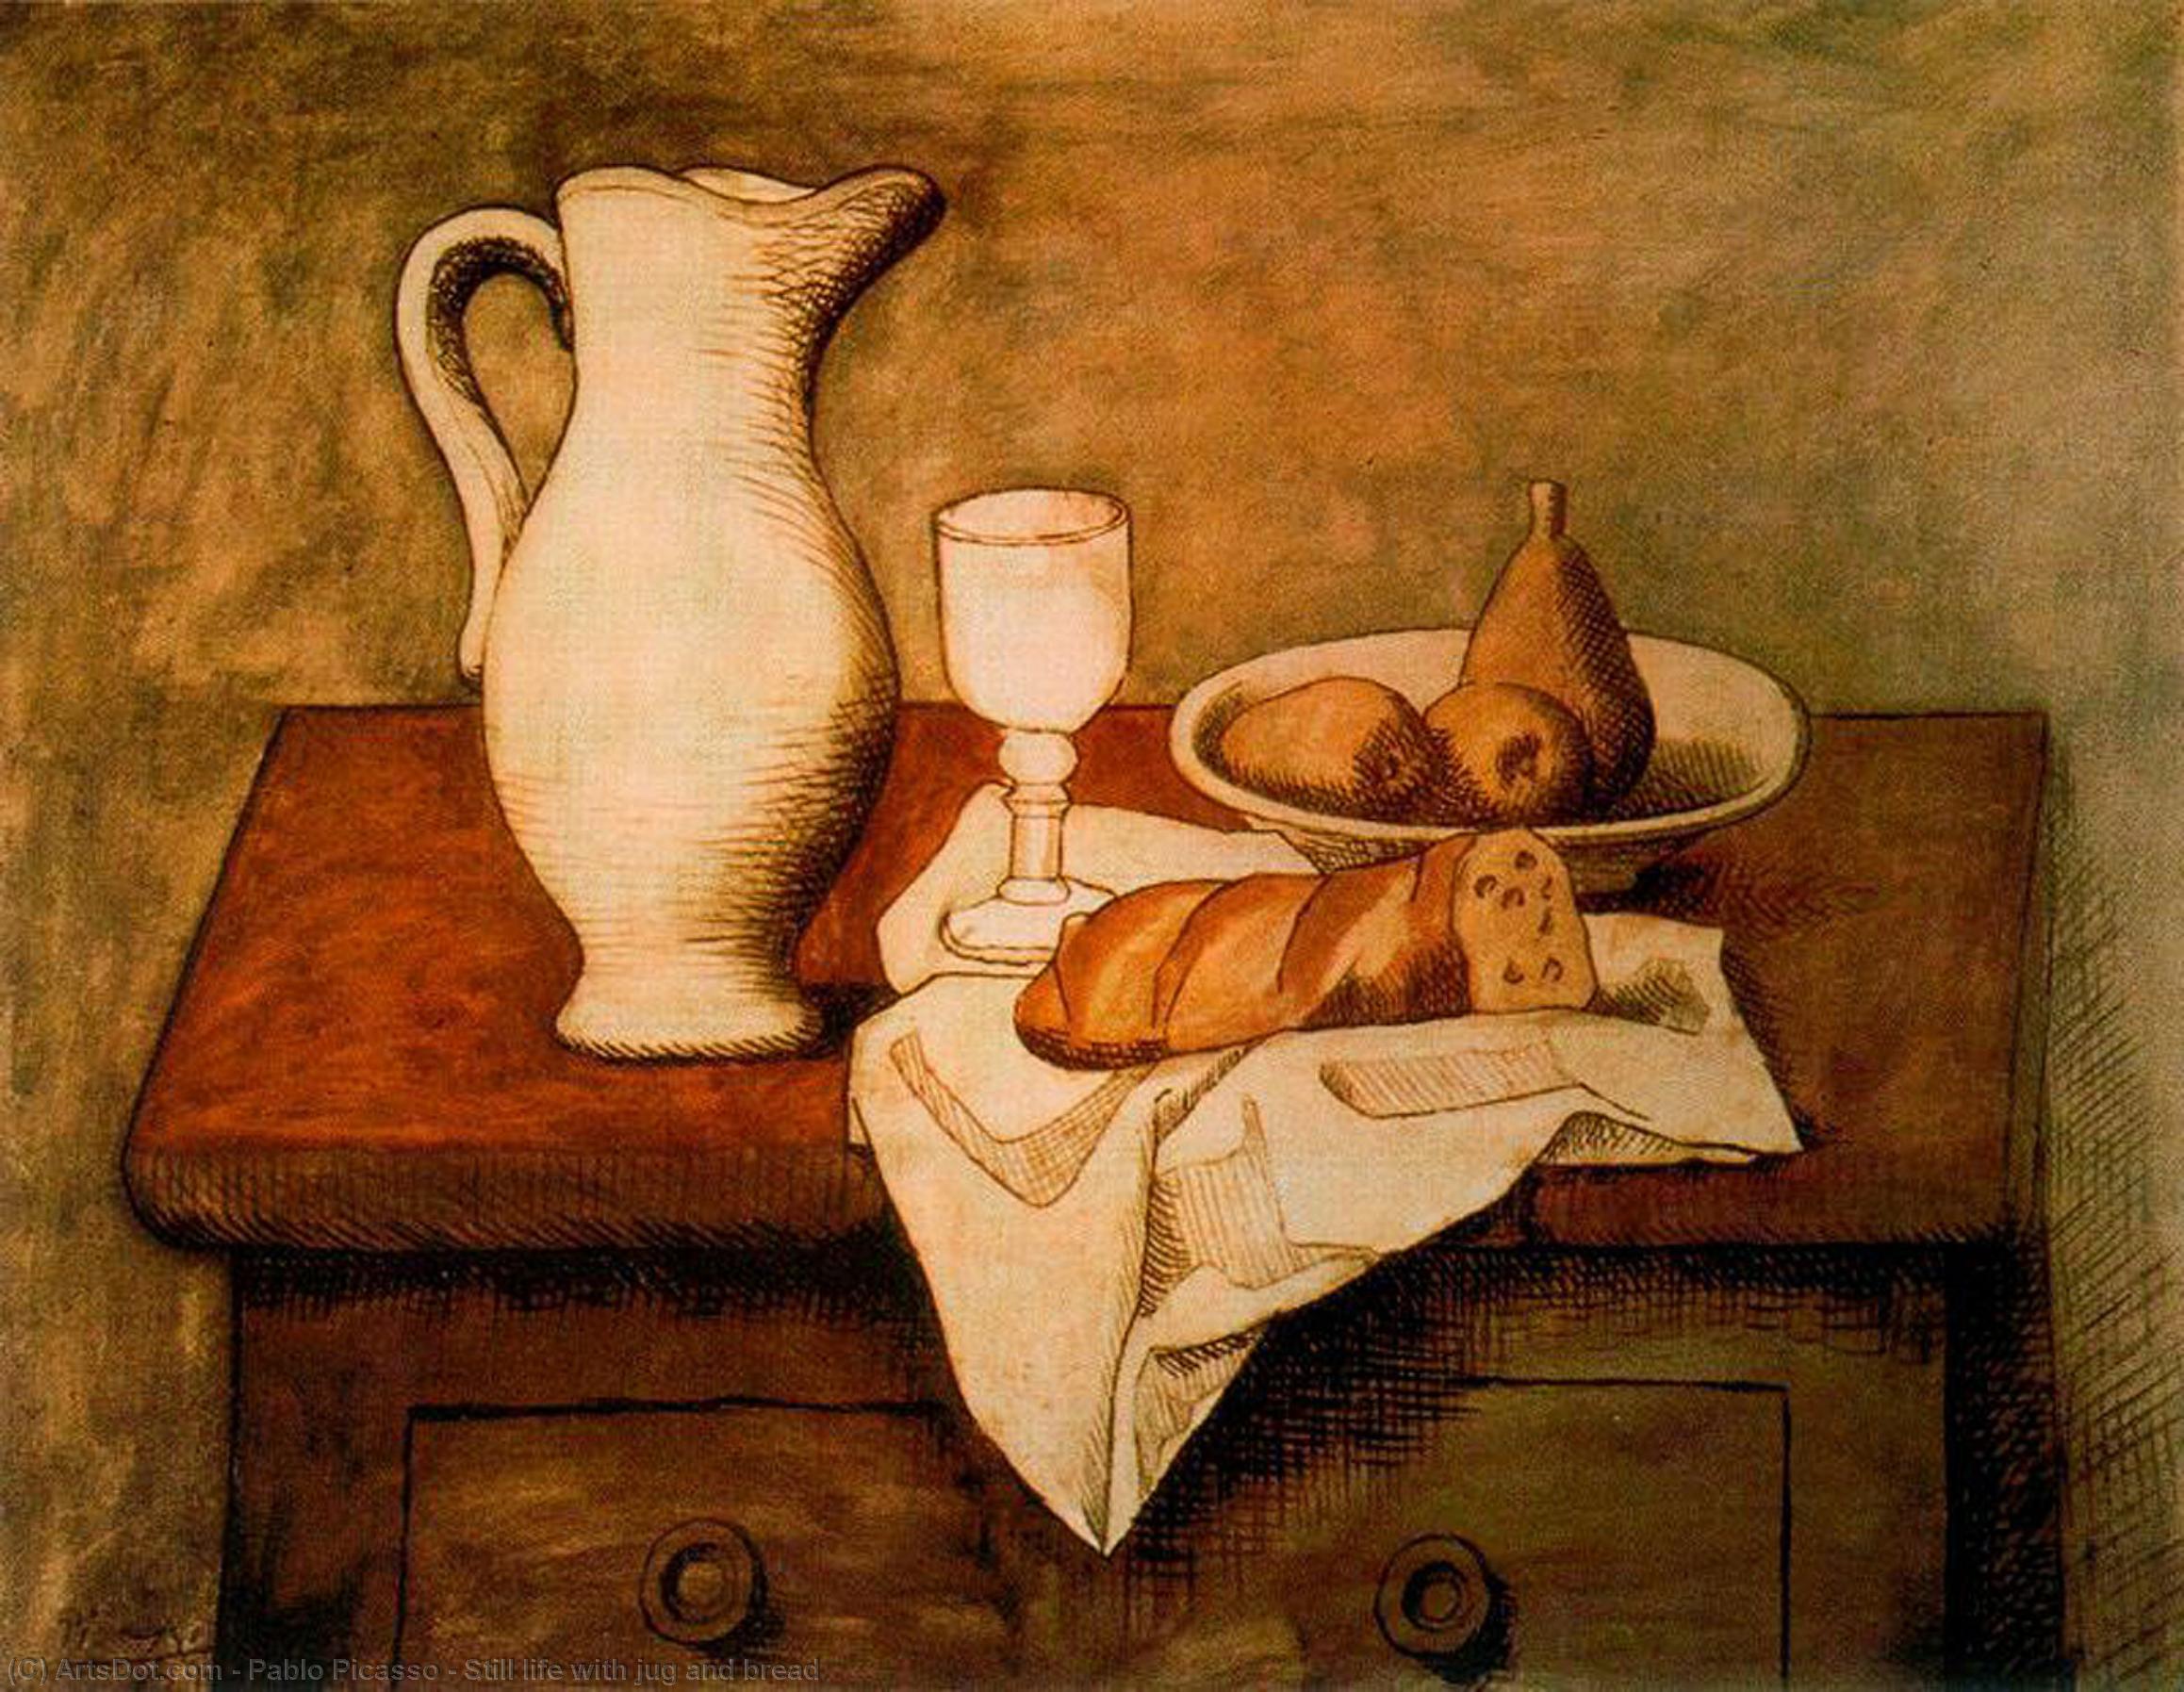 WikiOO.org - 백과 사전 - 회화, 삽화 Pablo Picasso - Still life with jug and bread